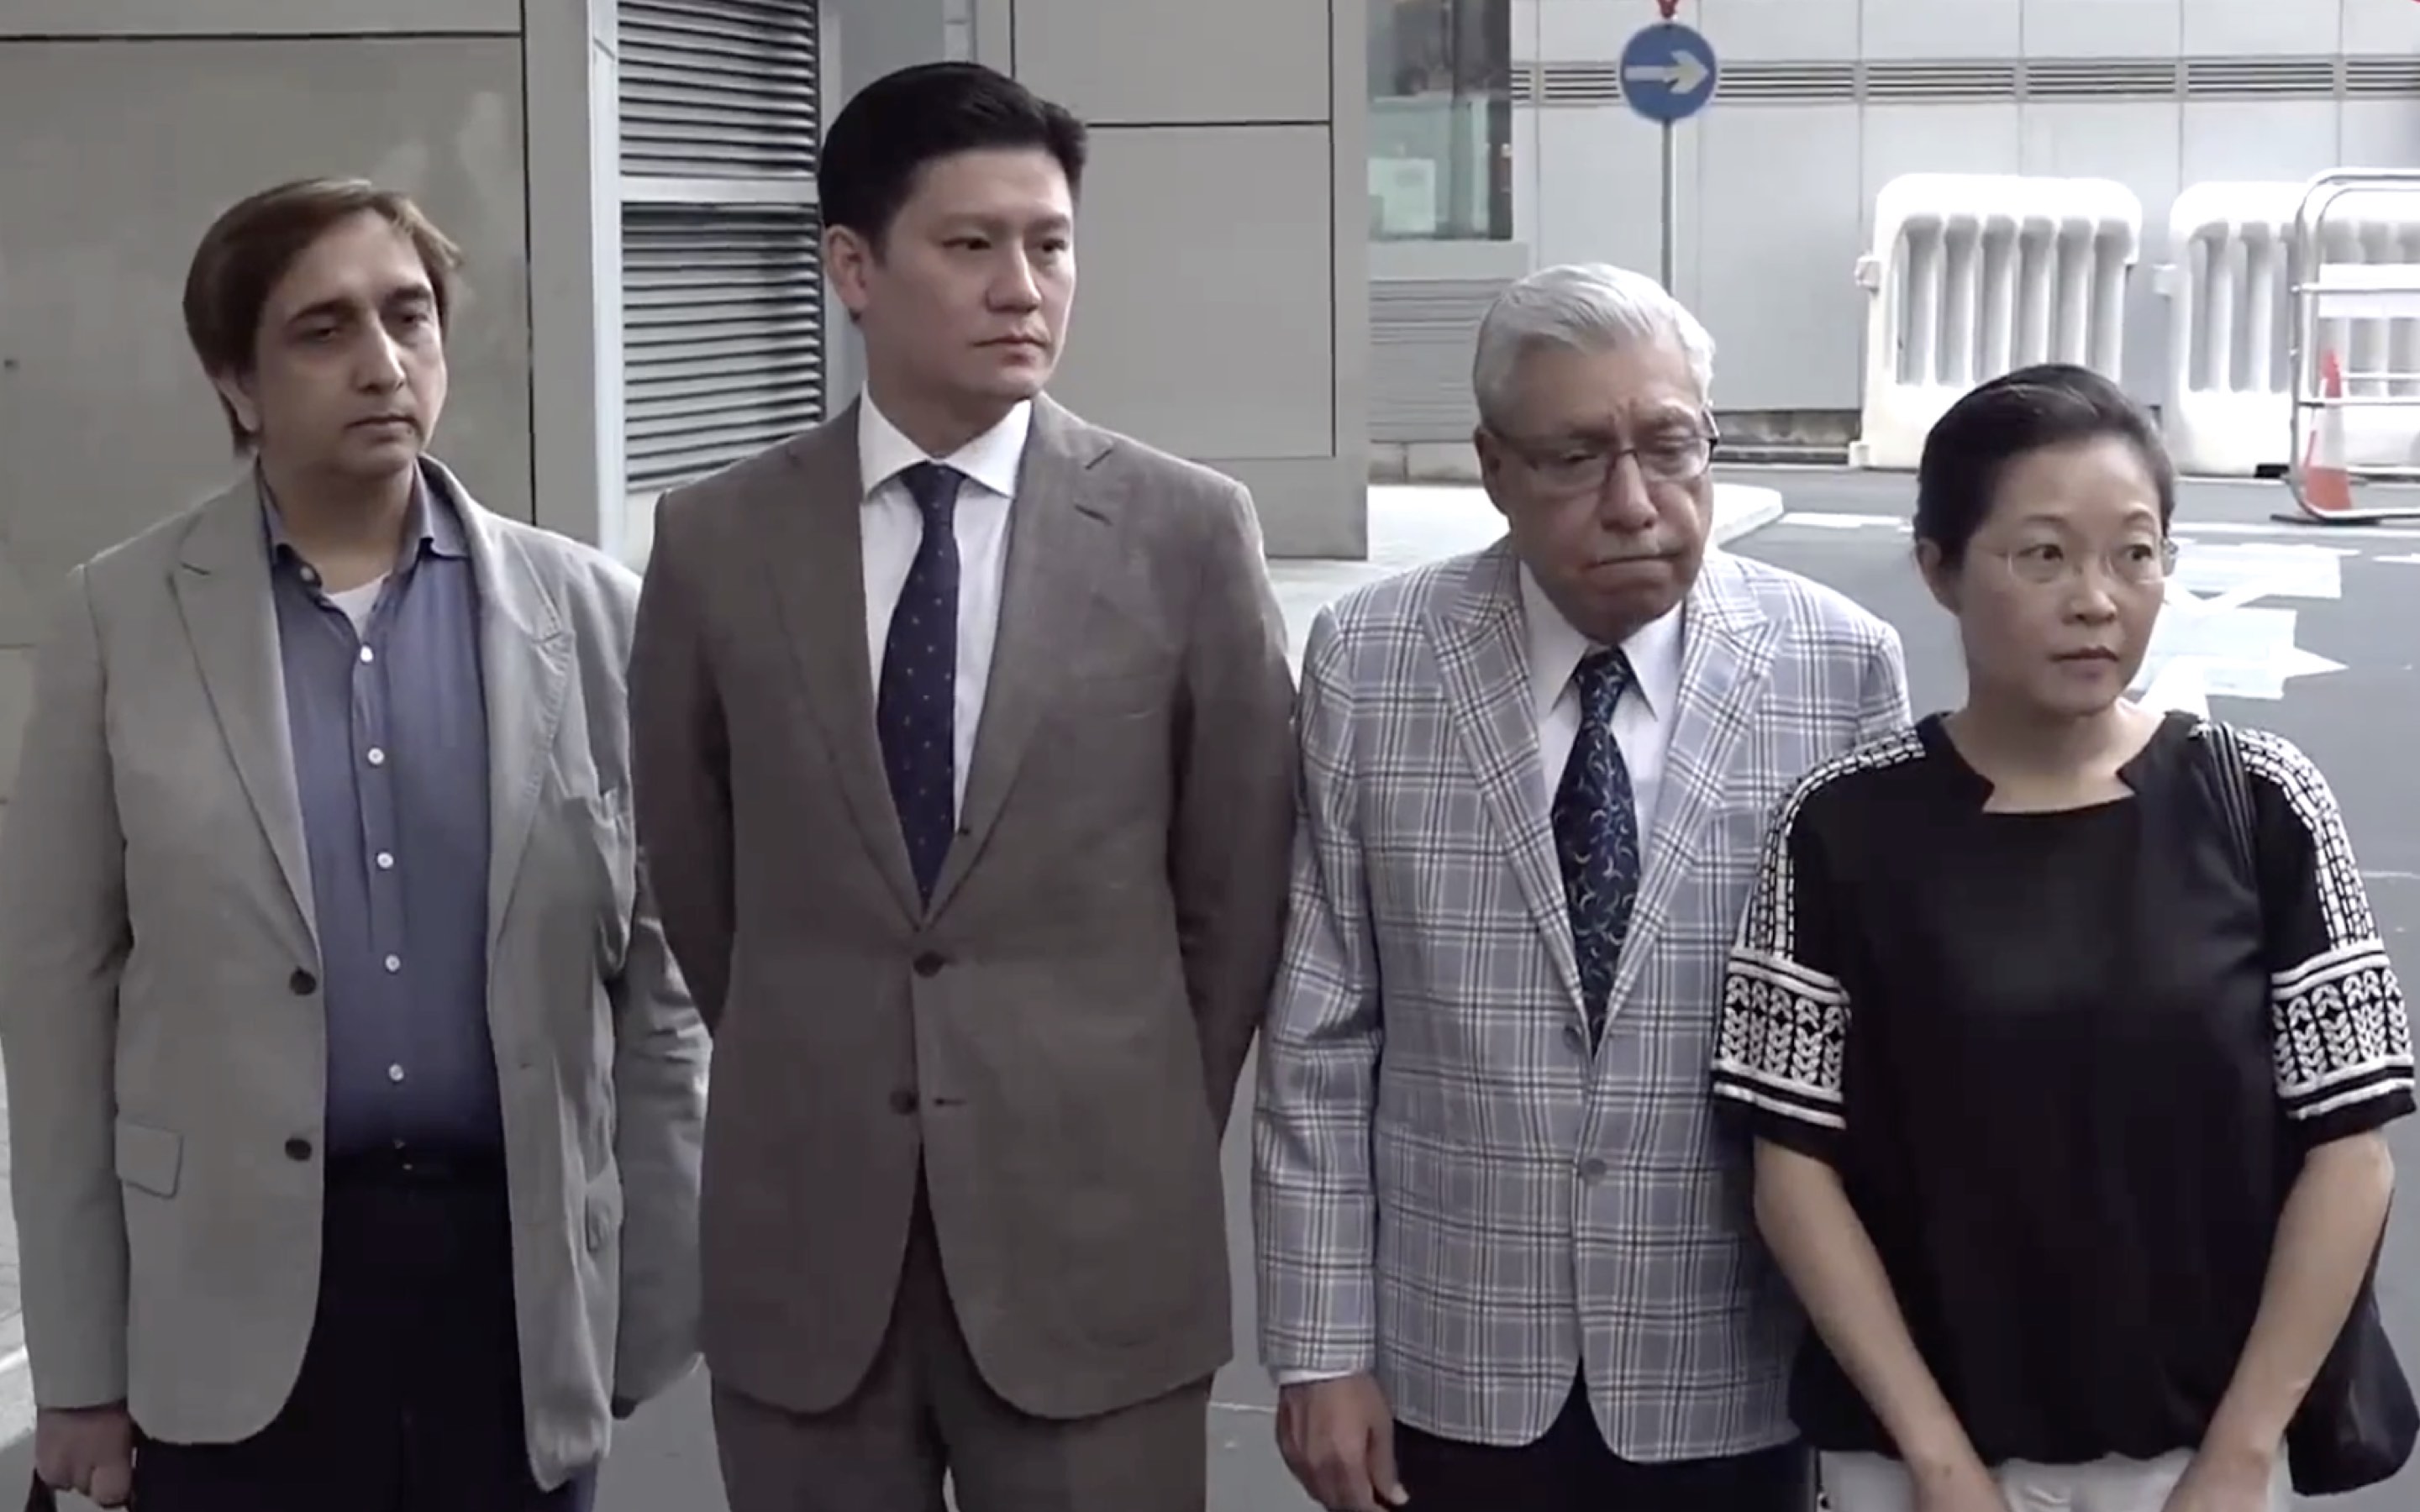 (From left to right) Philip Khan, Jeremy Tam, Mohan Chugani, and Phyllis Cheung arrive outside Police Headquarters in Wan Chai to file a formal complaint against the police use of a water cannon against the. The four were among a small group of people, mostly journalists, who were standing outside a mosque, and no other protesters were in the area. Screengrab via Apple Daily video.